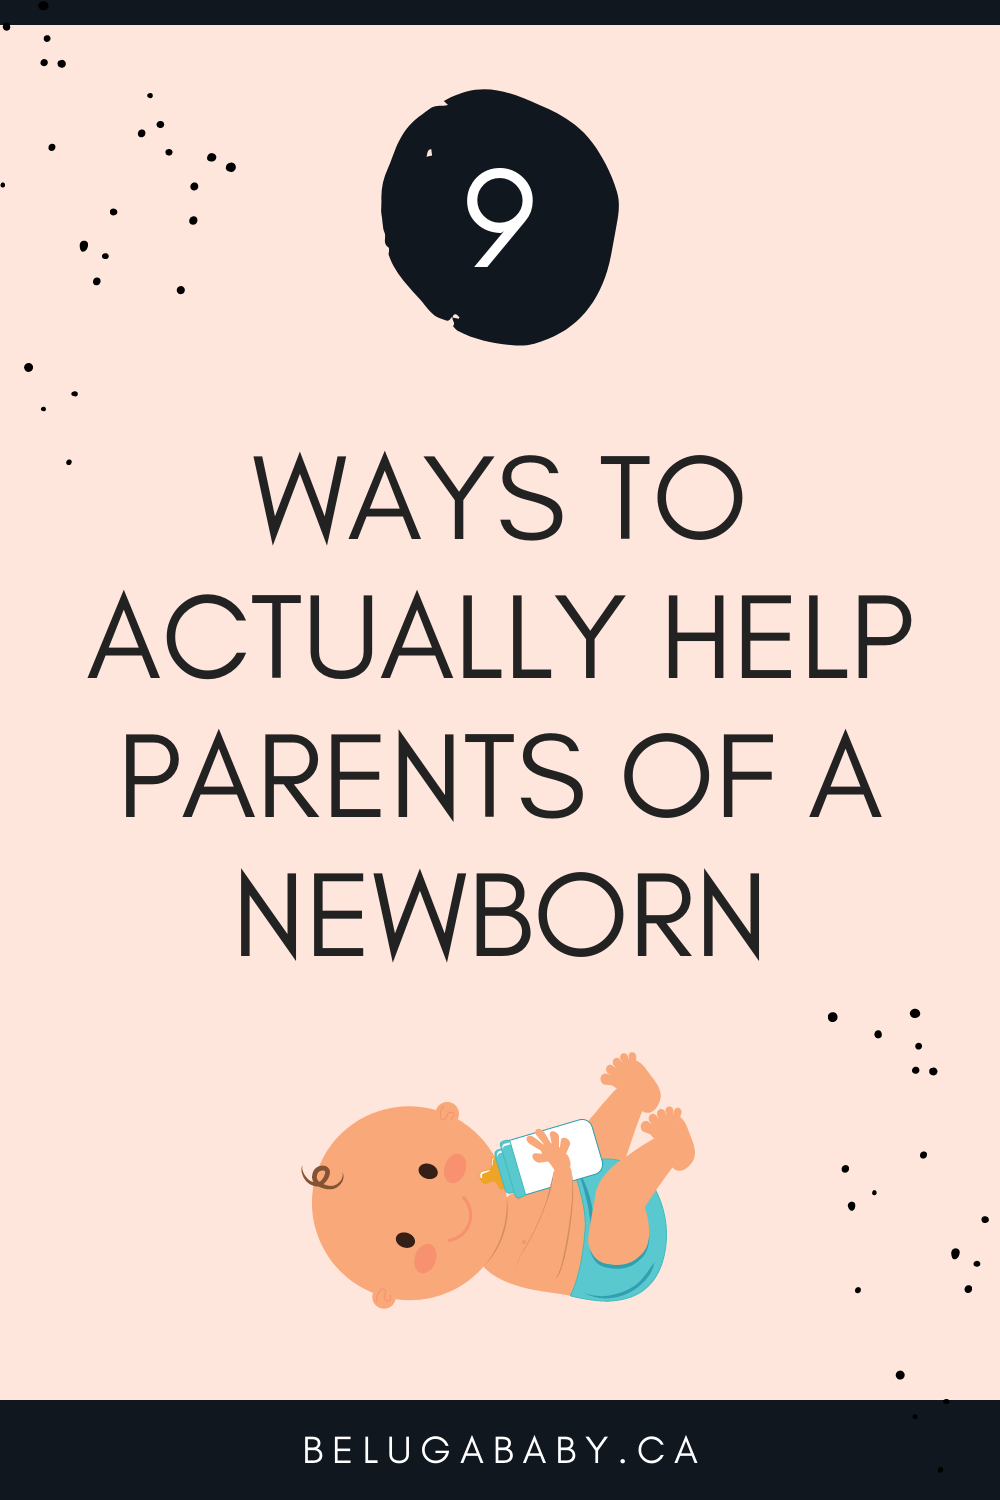 Nine Ways to Actually Help Parents of a Newborn